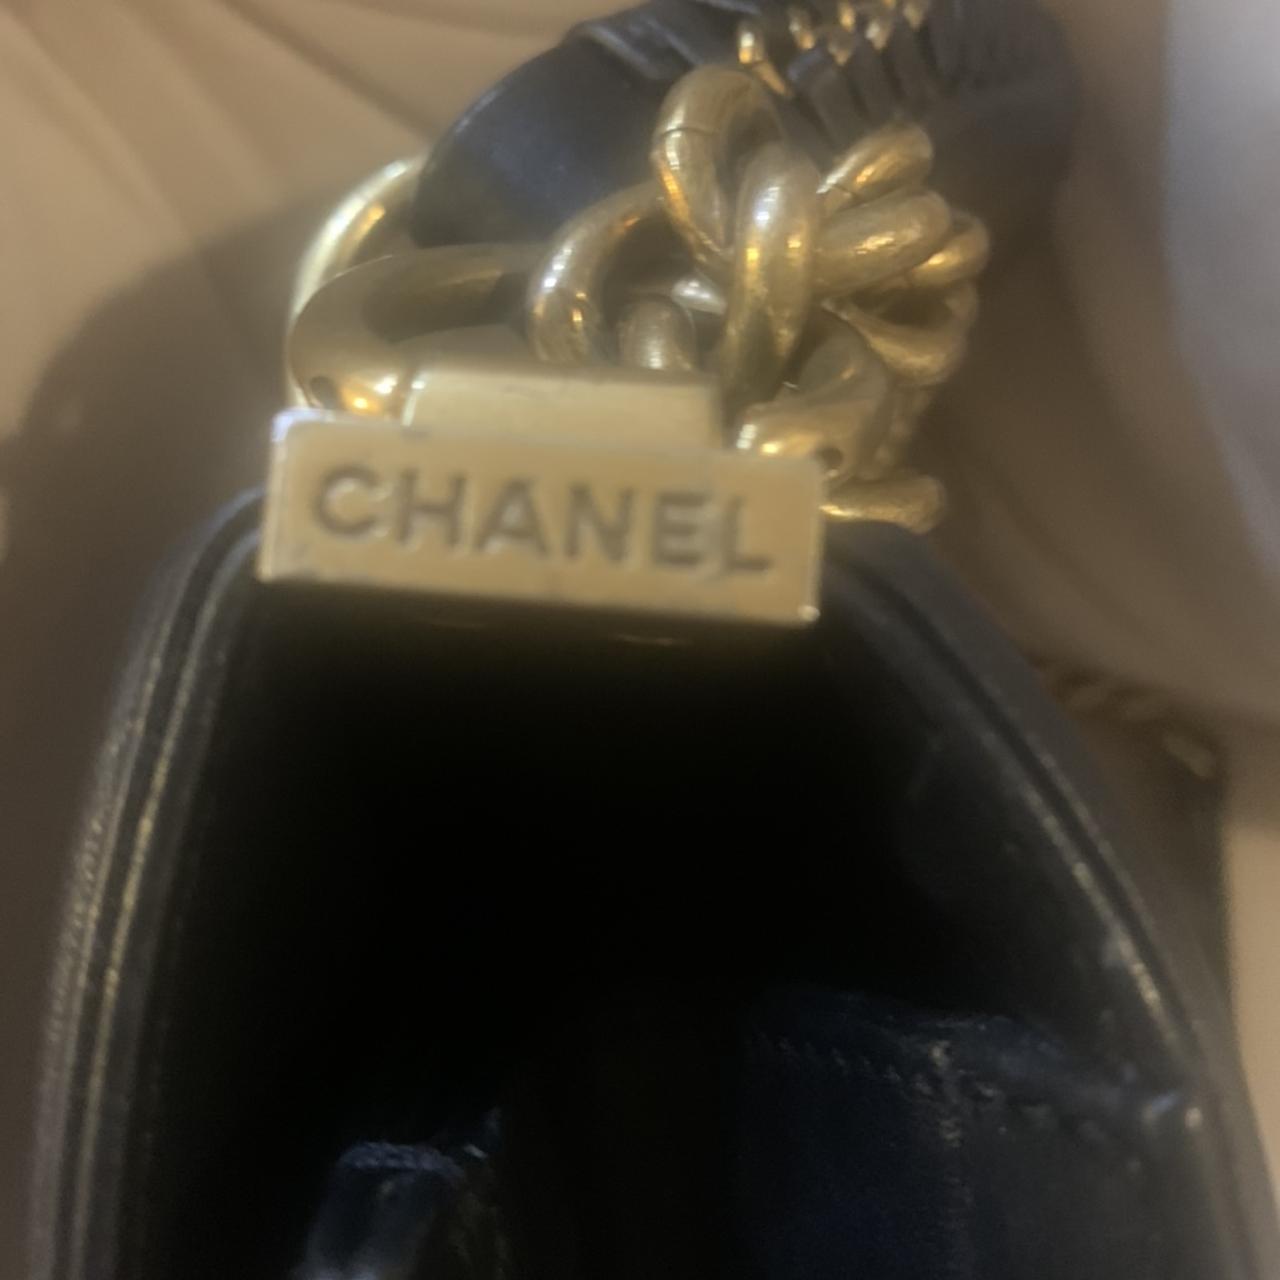 Very rare, authentic chanel boy bag. My mom gave me